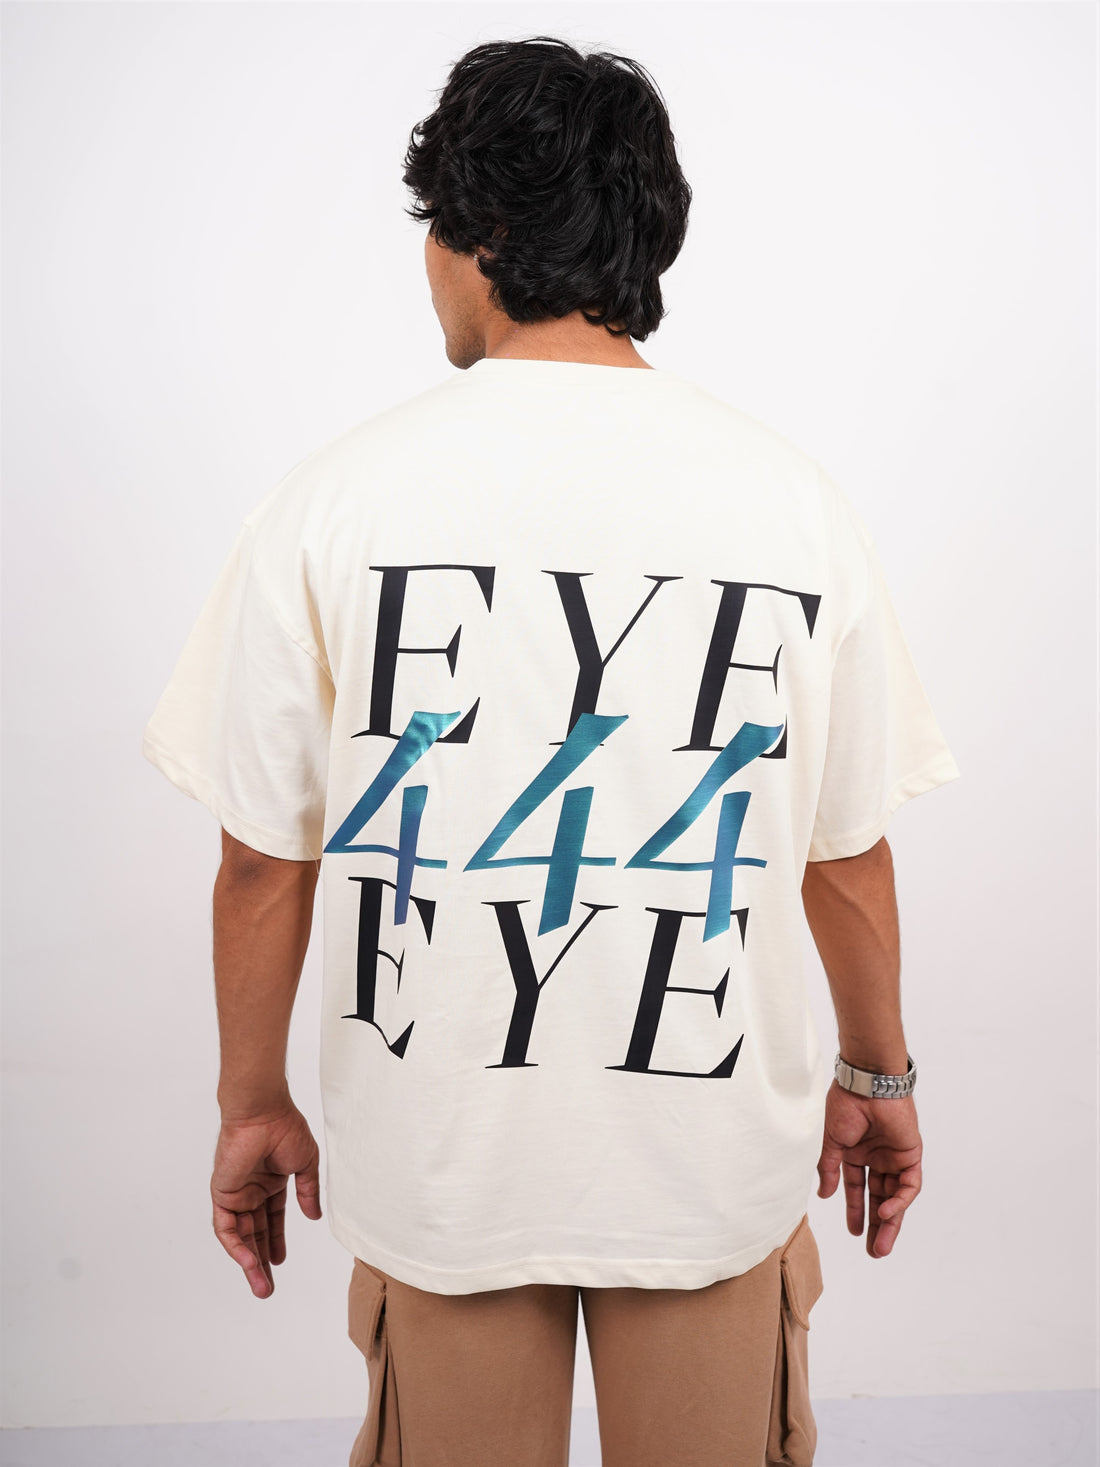 The eye for eye tee - Vision Drop Sleeved  tee   For Men and Women